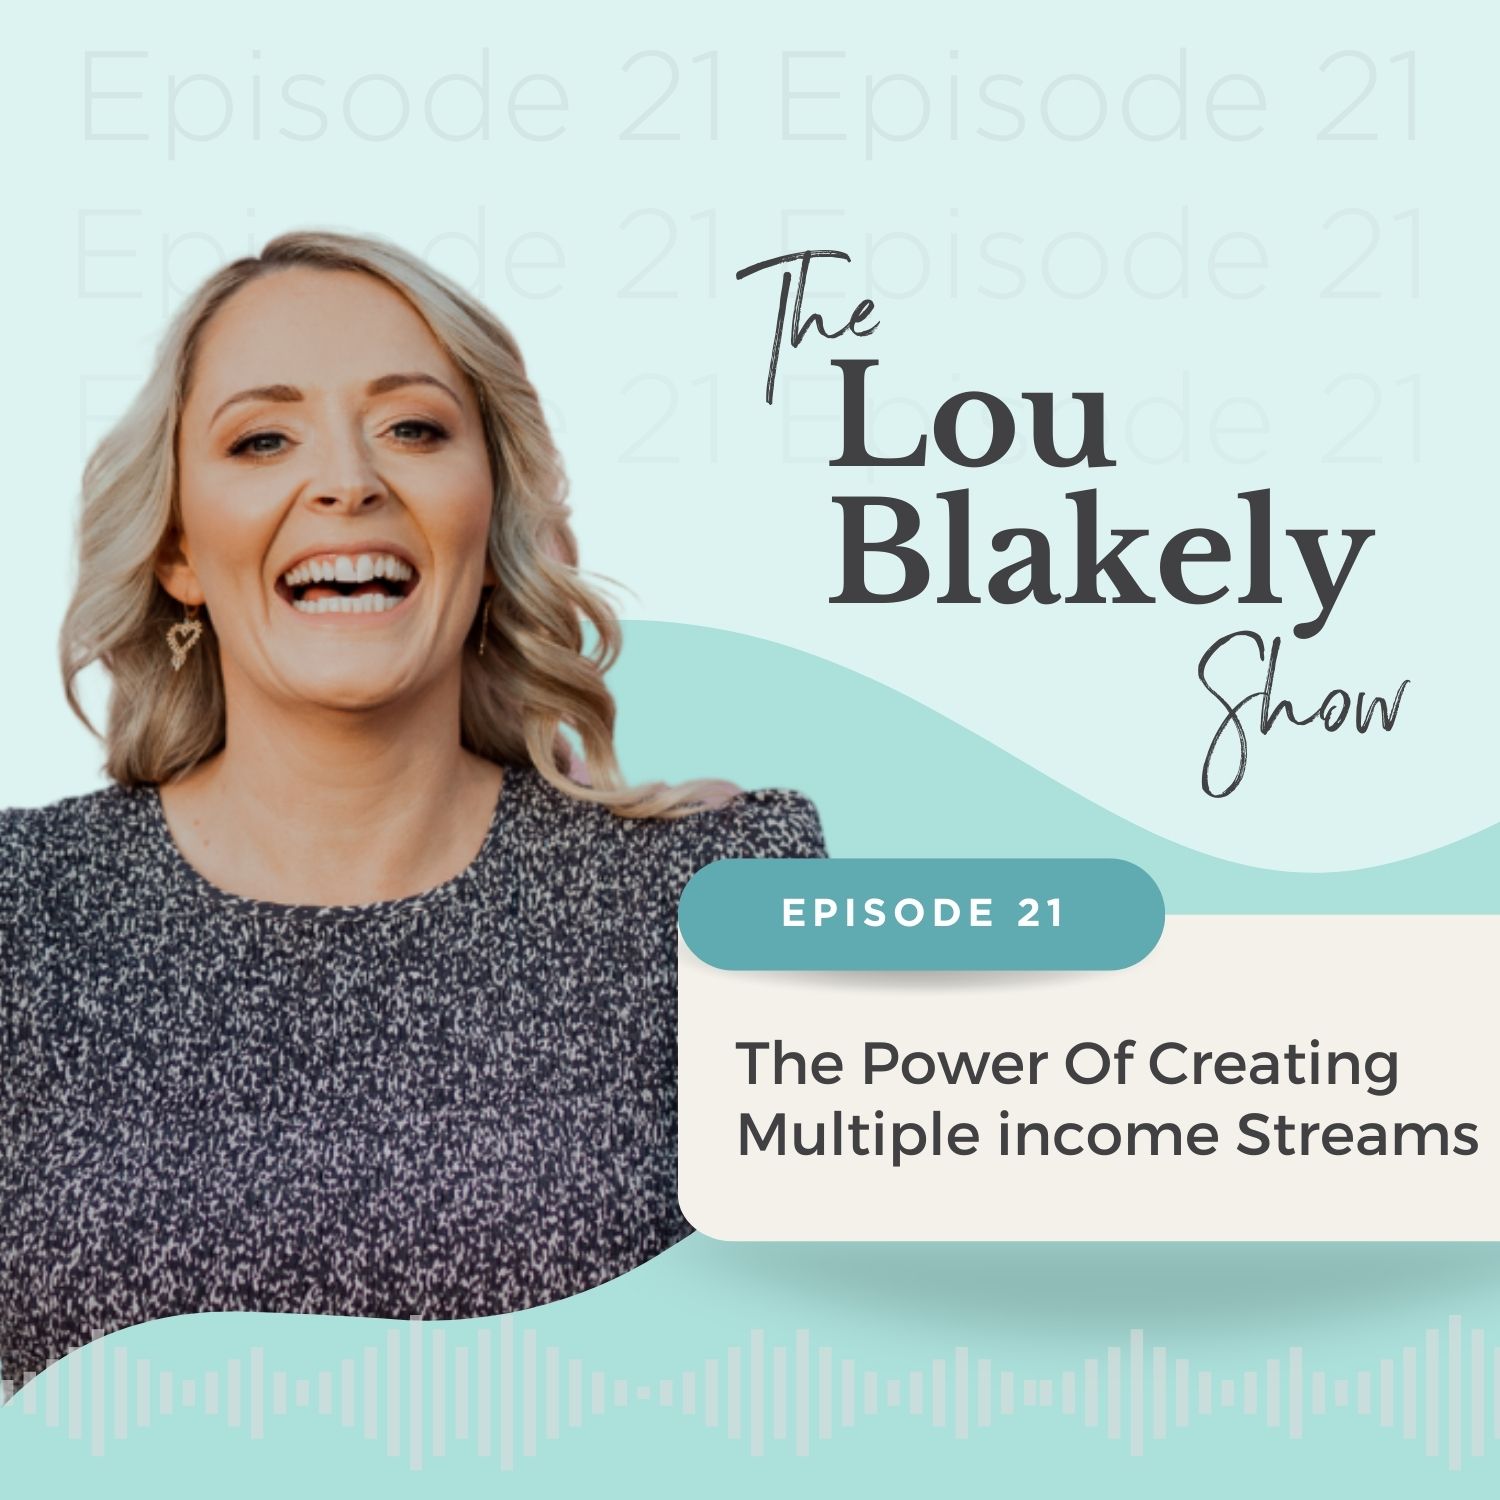 The power of creating multiple income streams